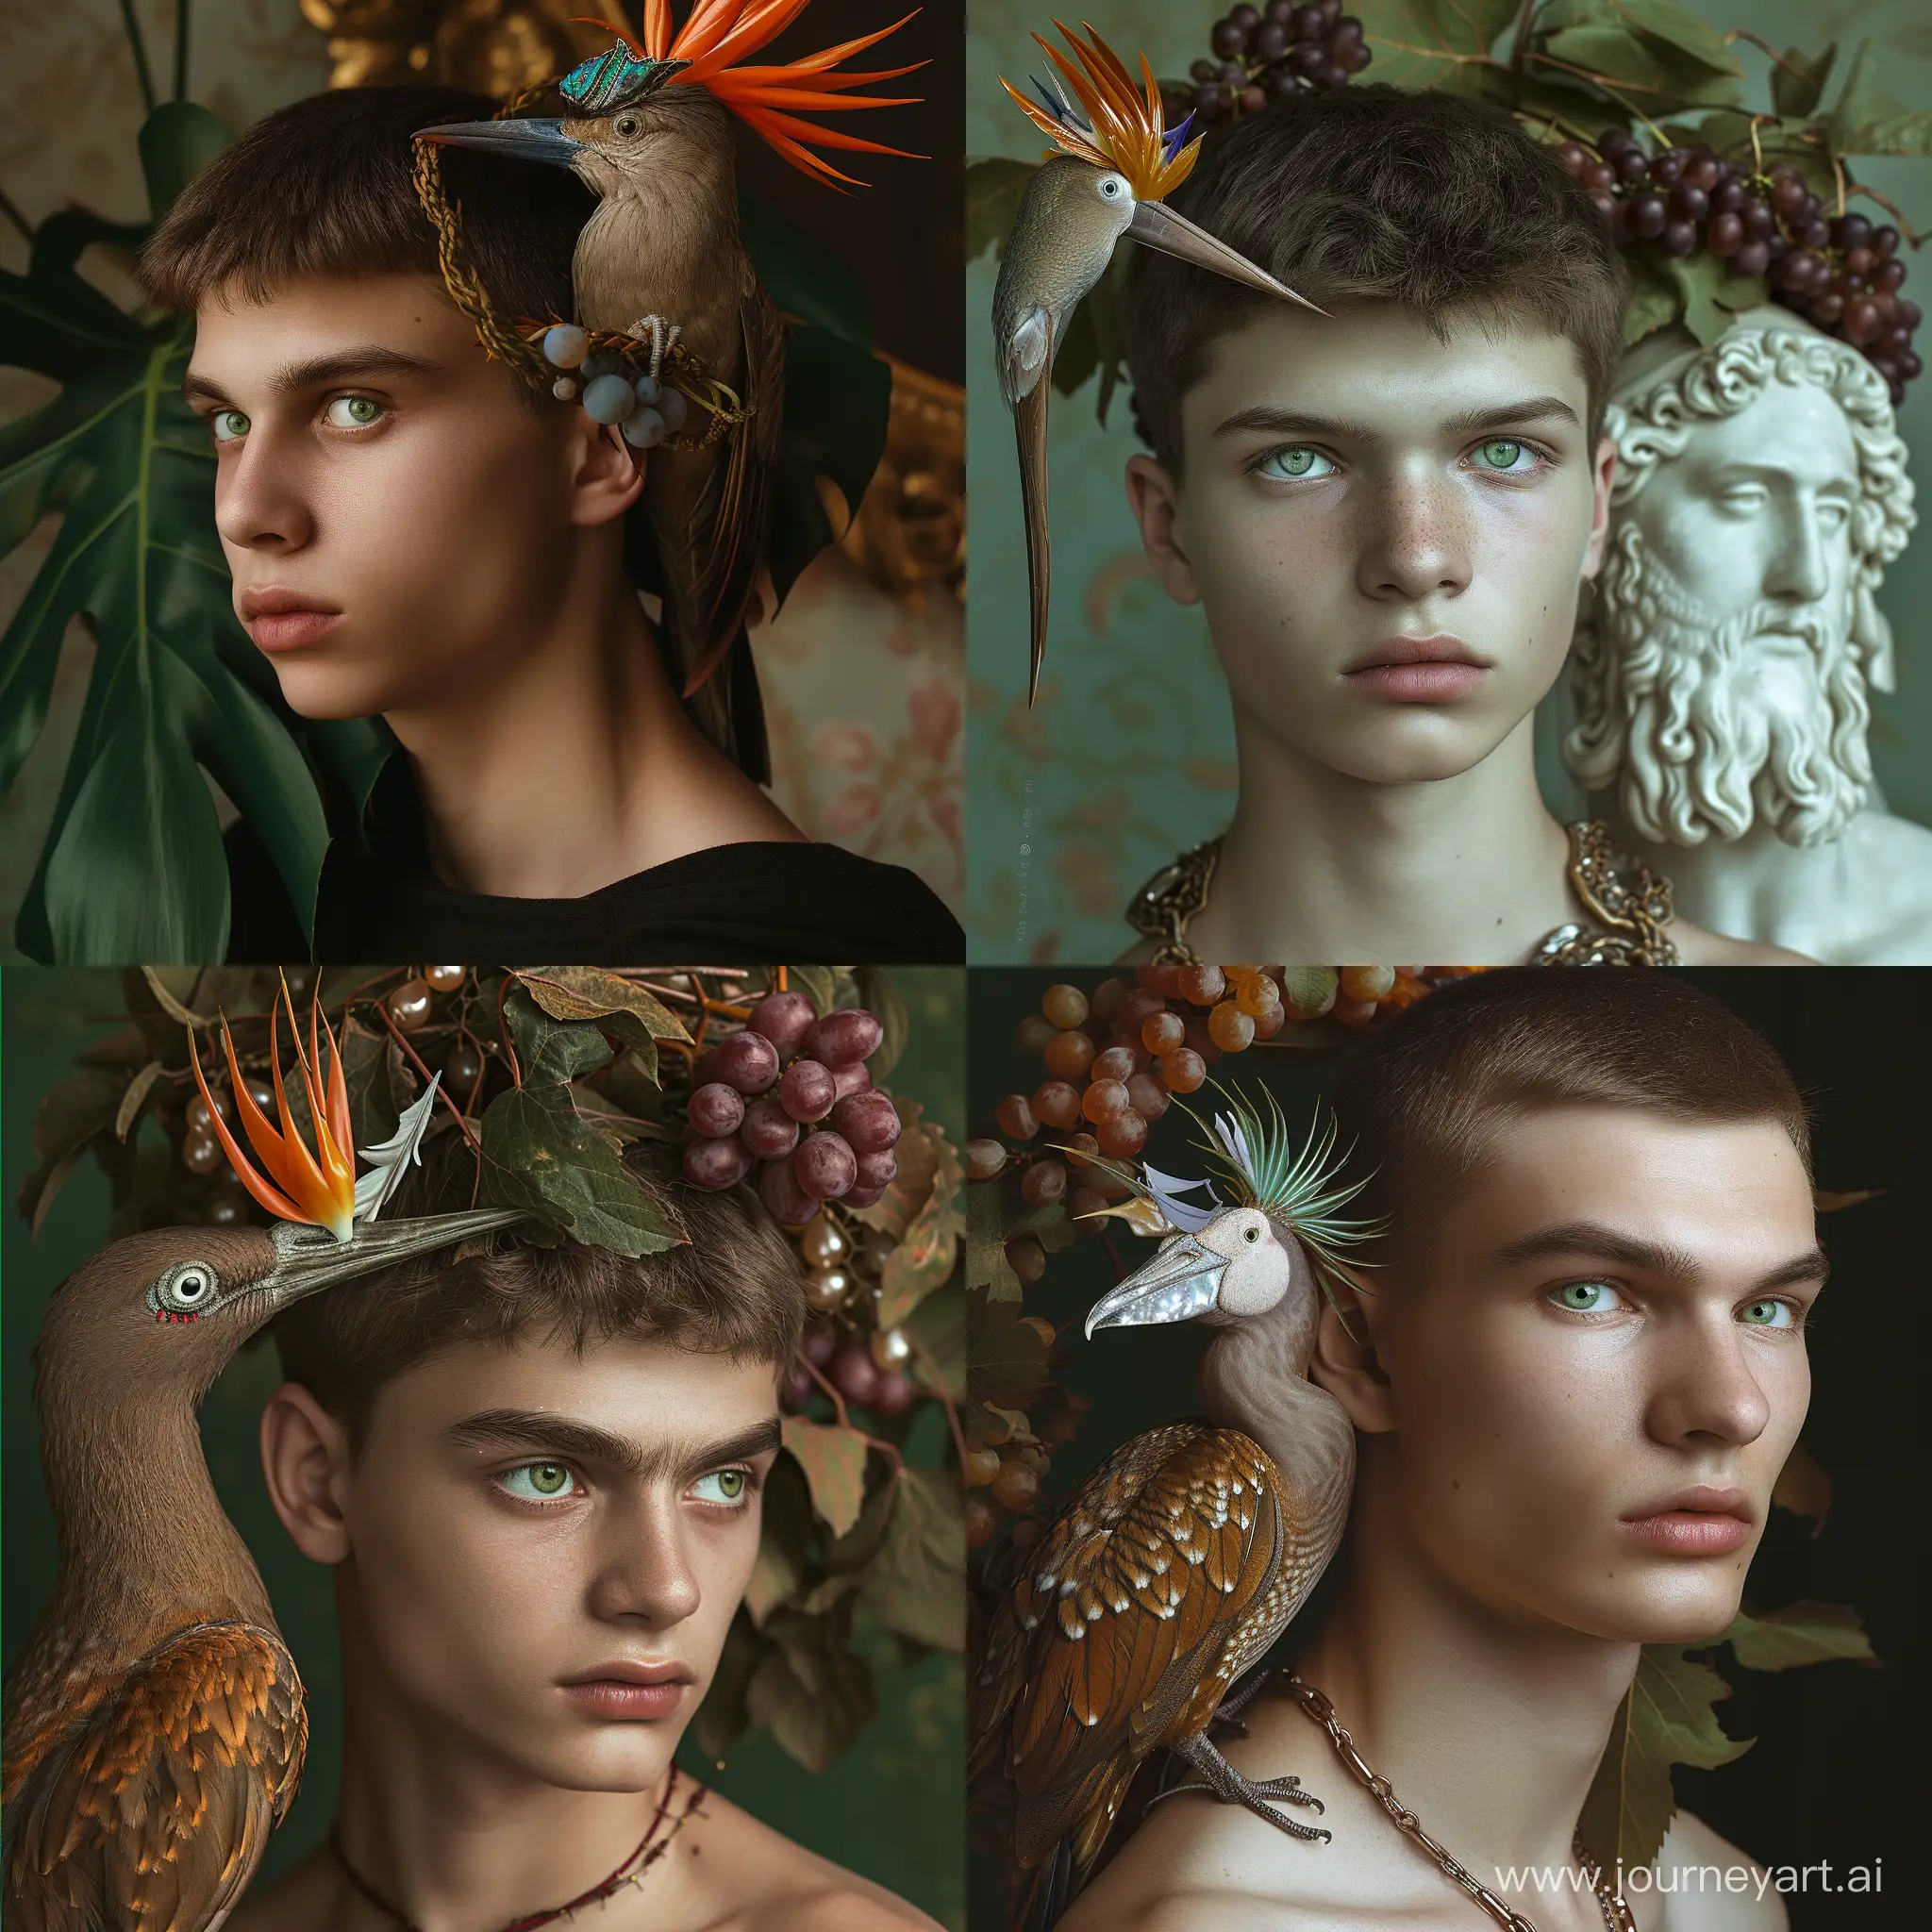 Fashion-Portrait-of-Slavic-Man-with-Bird-of-Paradise-and-Dionysian-Elements